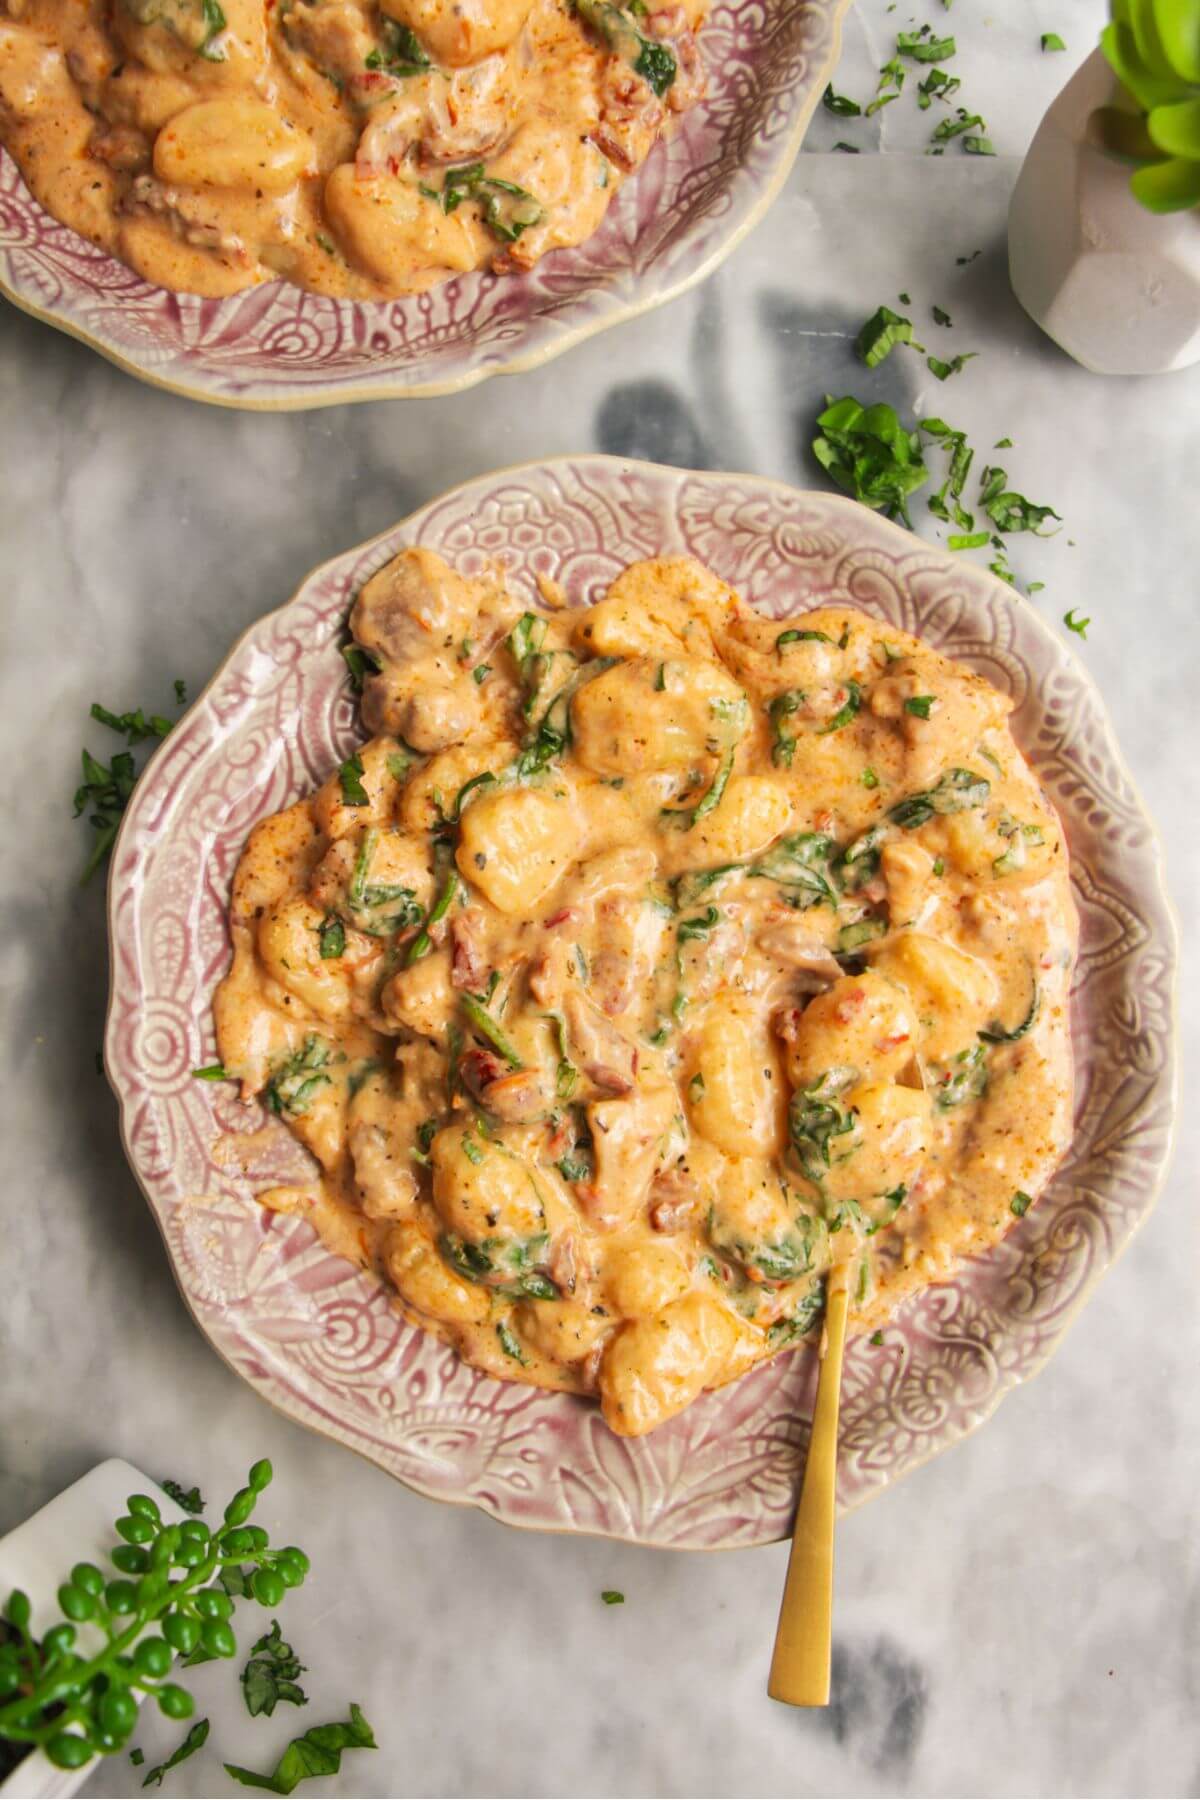 Creamy chicken gnocchi on a pink plate with another plate in the background, with a gold spoon inside.